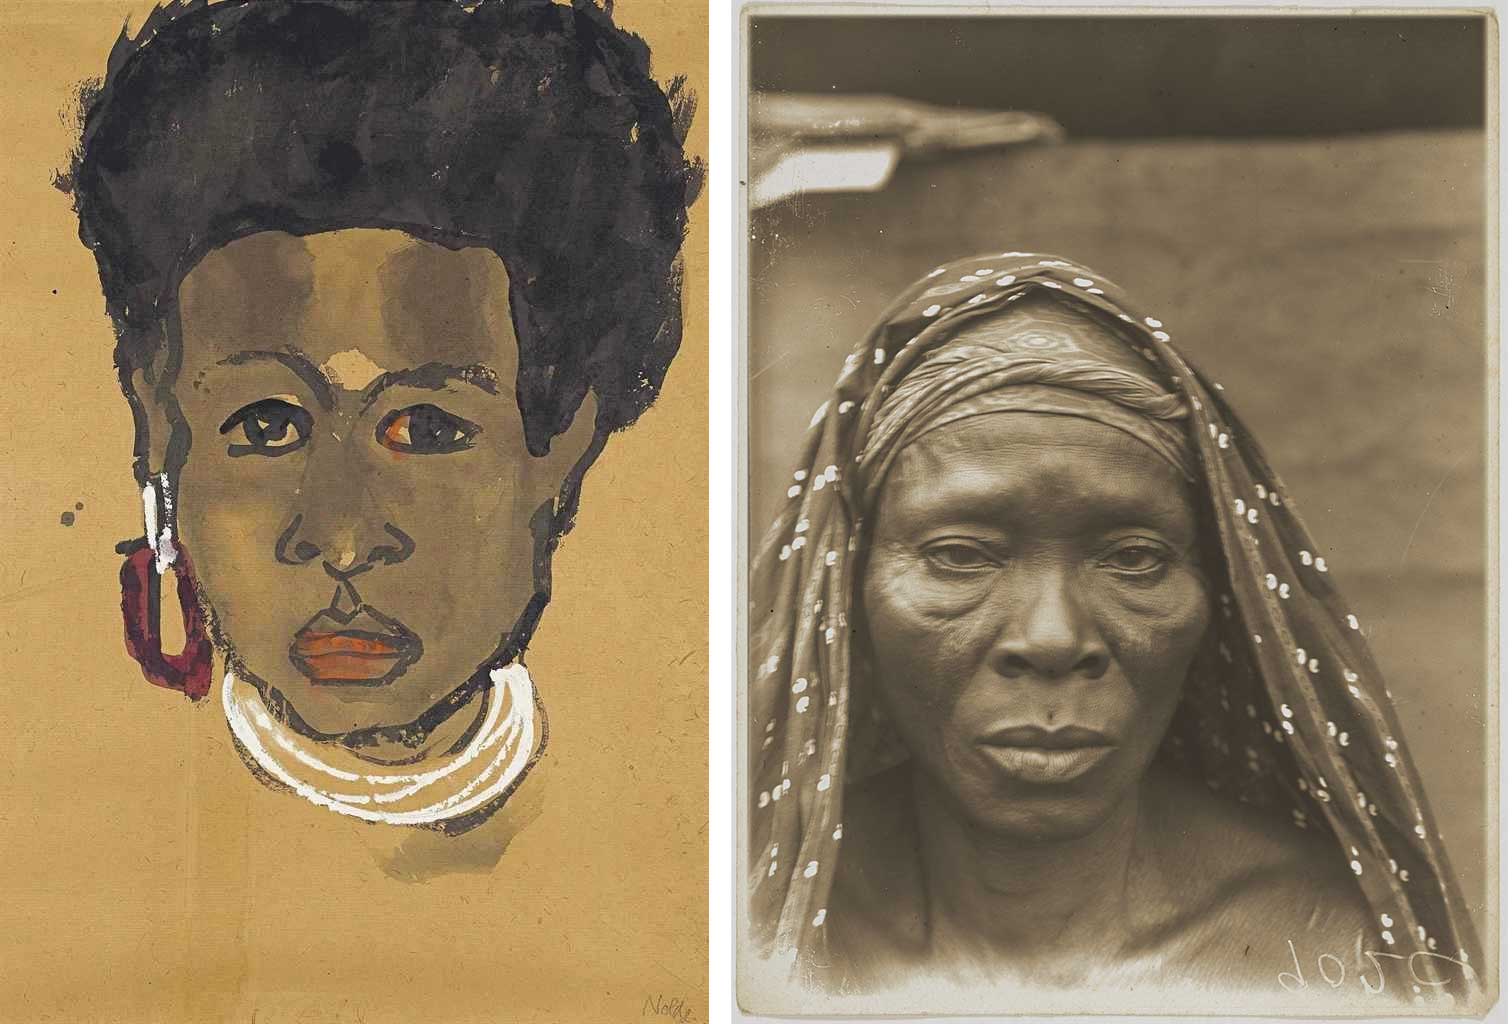 Anthropological pictorialism. Left: Emil Nolde, Bildnis einer Südseeinsulanerin (en face), 1914, watercolour and ink on paper, 51.5.5 x 37 cm, ©Nolde Stiftung Seebüll. Right: Northcote Thomas’ physical type photograph, unnamed woman, Agbede, present-day Edo State, Nigeria, 1909, ©Royal Anthropological Institute, London, Inv.-Nr. 400_037799.